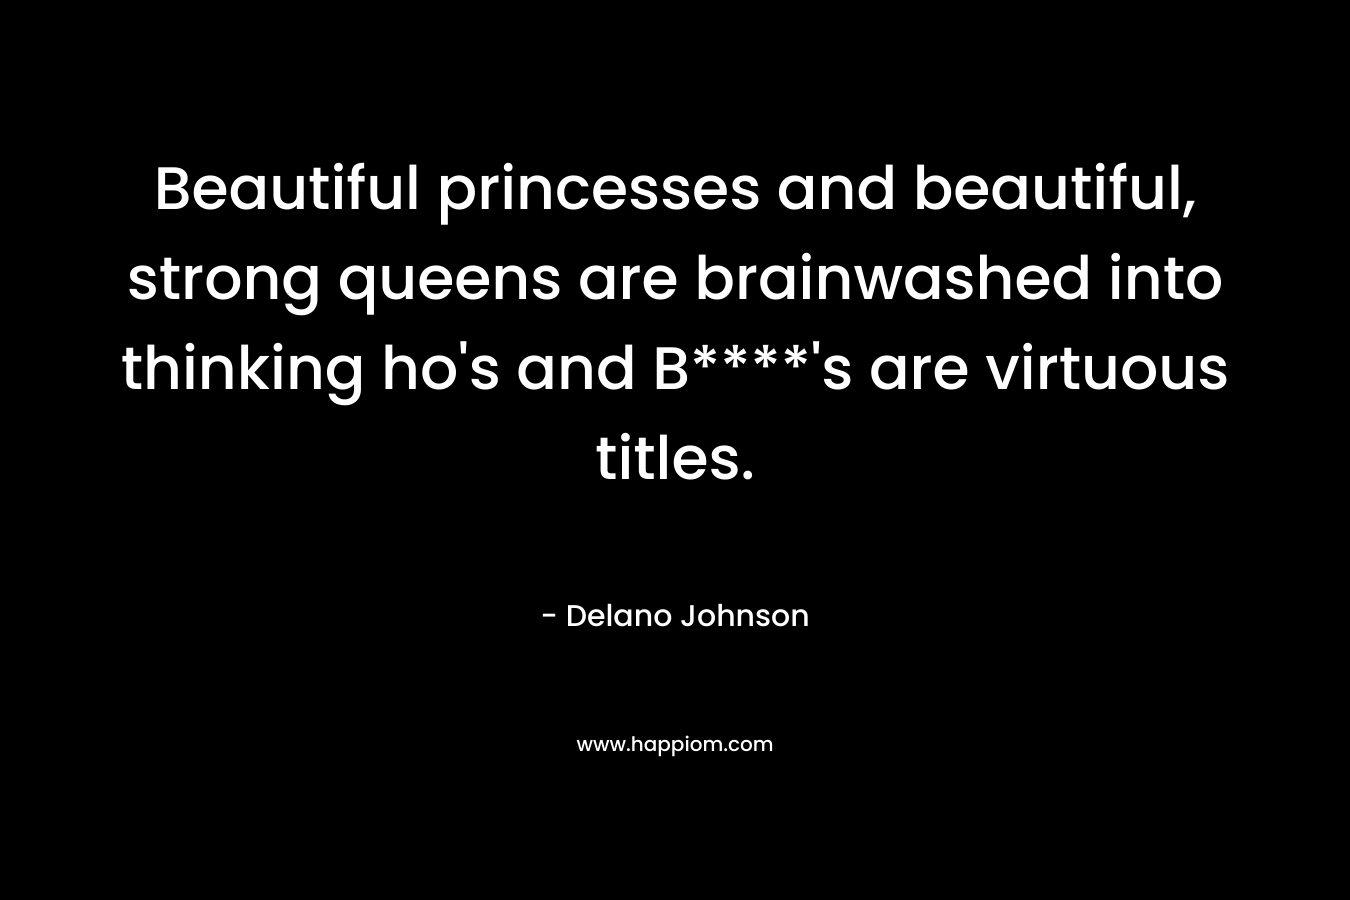 Beautiful princesses and beautiful, strong queens are brainwashed into thinking ho’s and B****’s are virtuous titles. – Delano Johnson